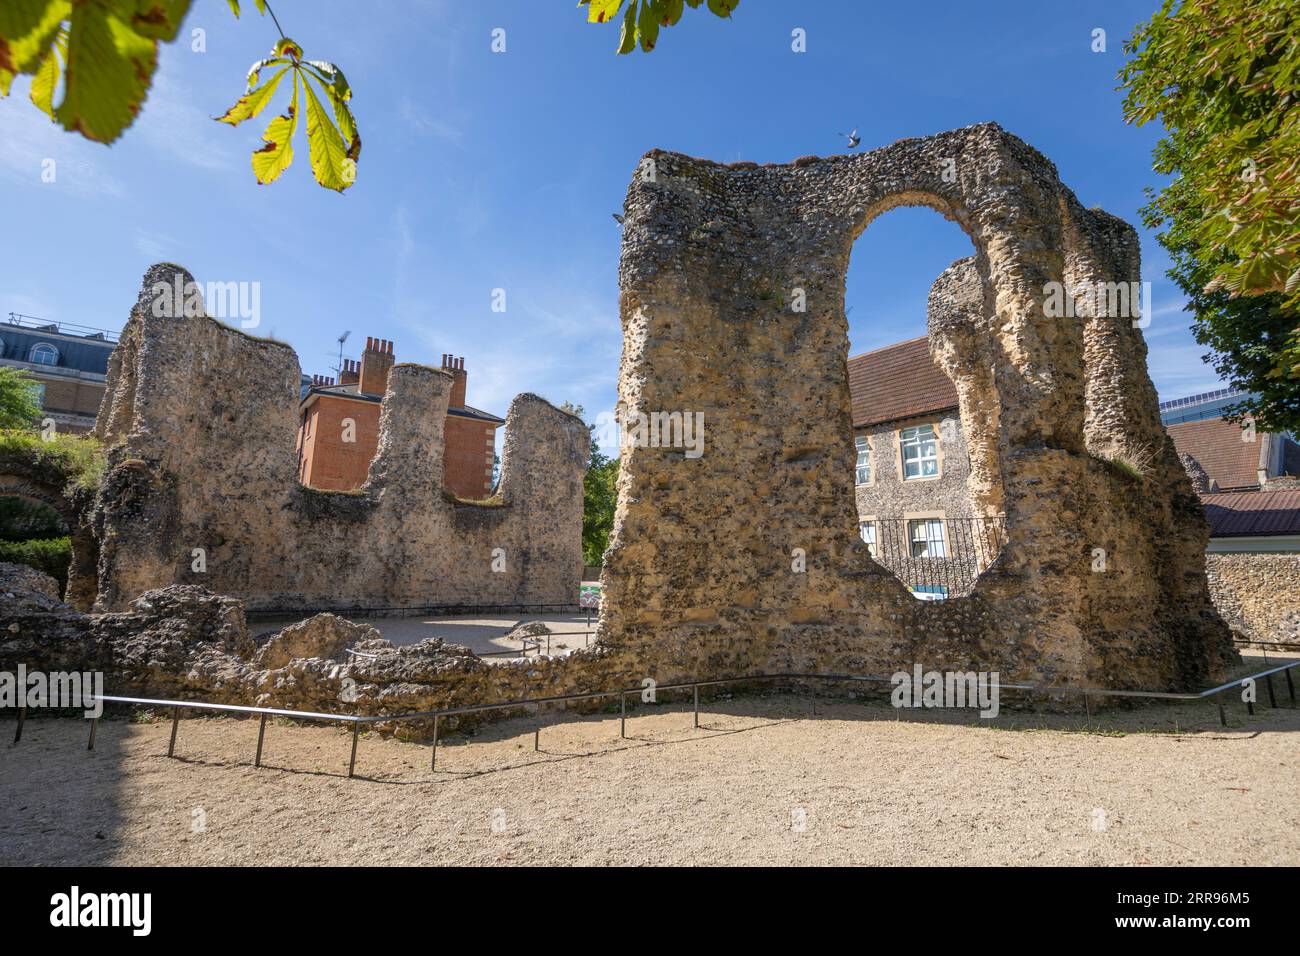 Ruines de Reading Abbey, Reading, Berkshire, Angleterre, Royaume-Uni, Europe Banque D'Images